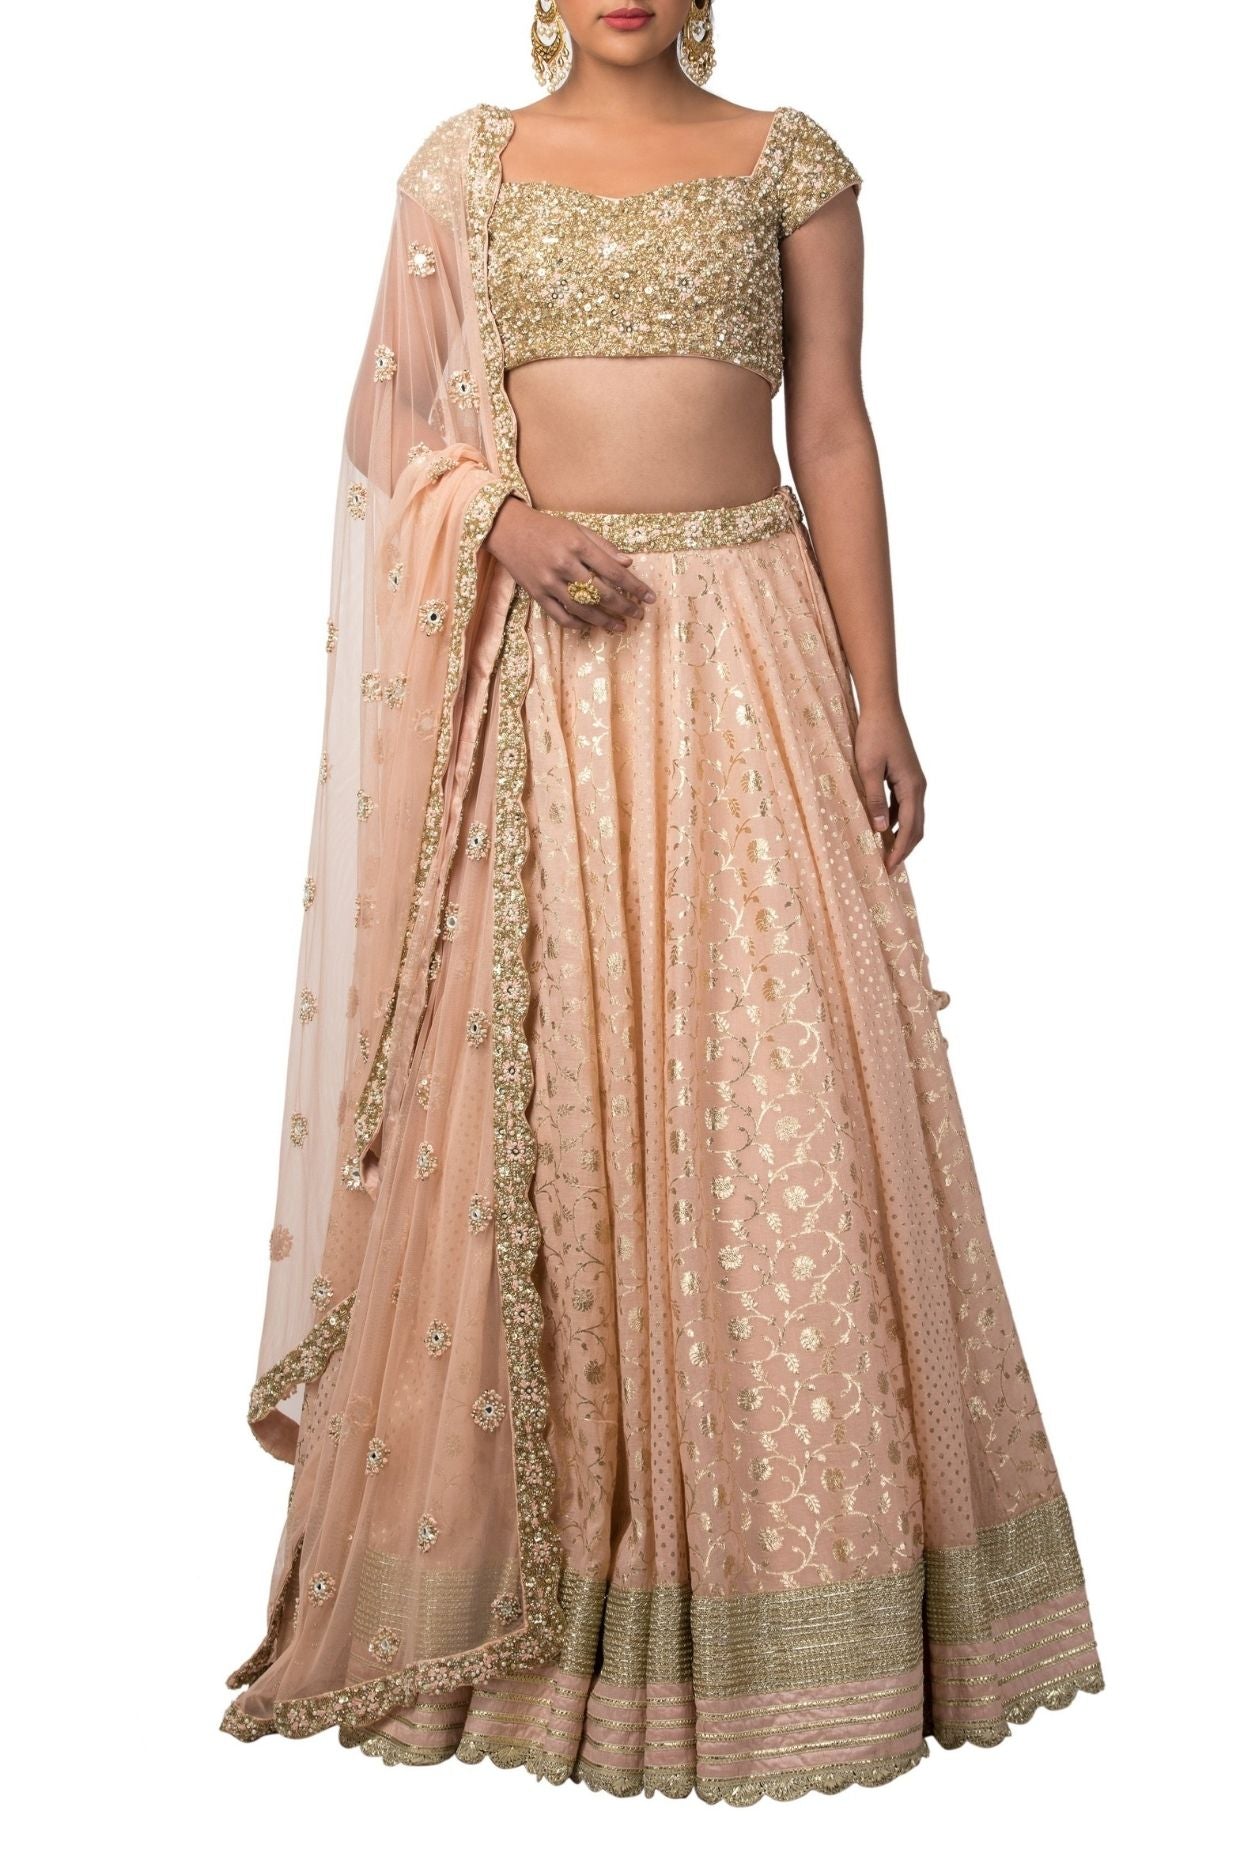 SWEET PEACH CHIKAN LEHENGA SET WITH A COLOURED EMBROIDERED BLOUSE PAIRED  WITH A MATCHING DUPATTA AND SILVER EMBELLISHMENTS. - Seasons India